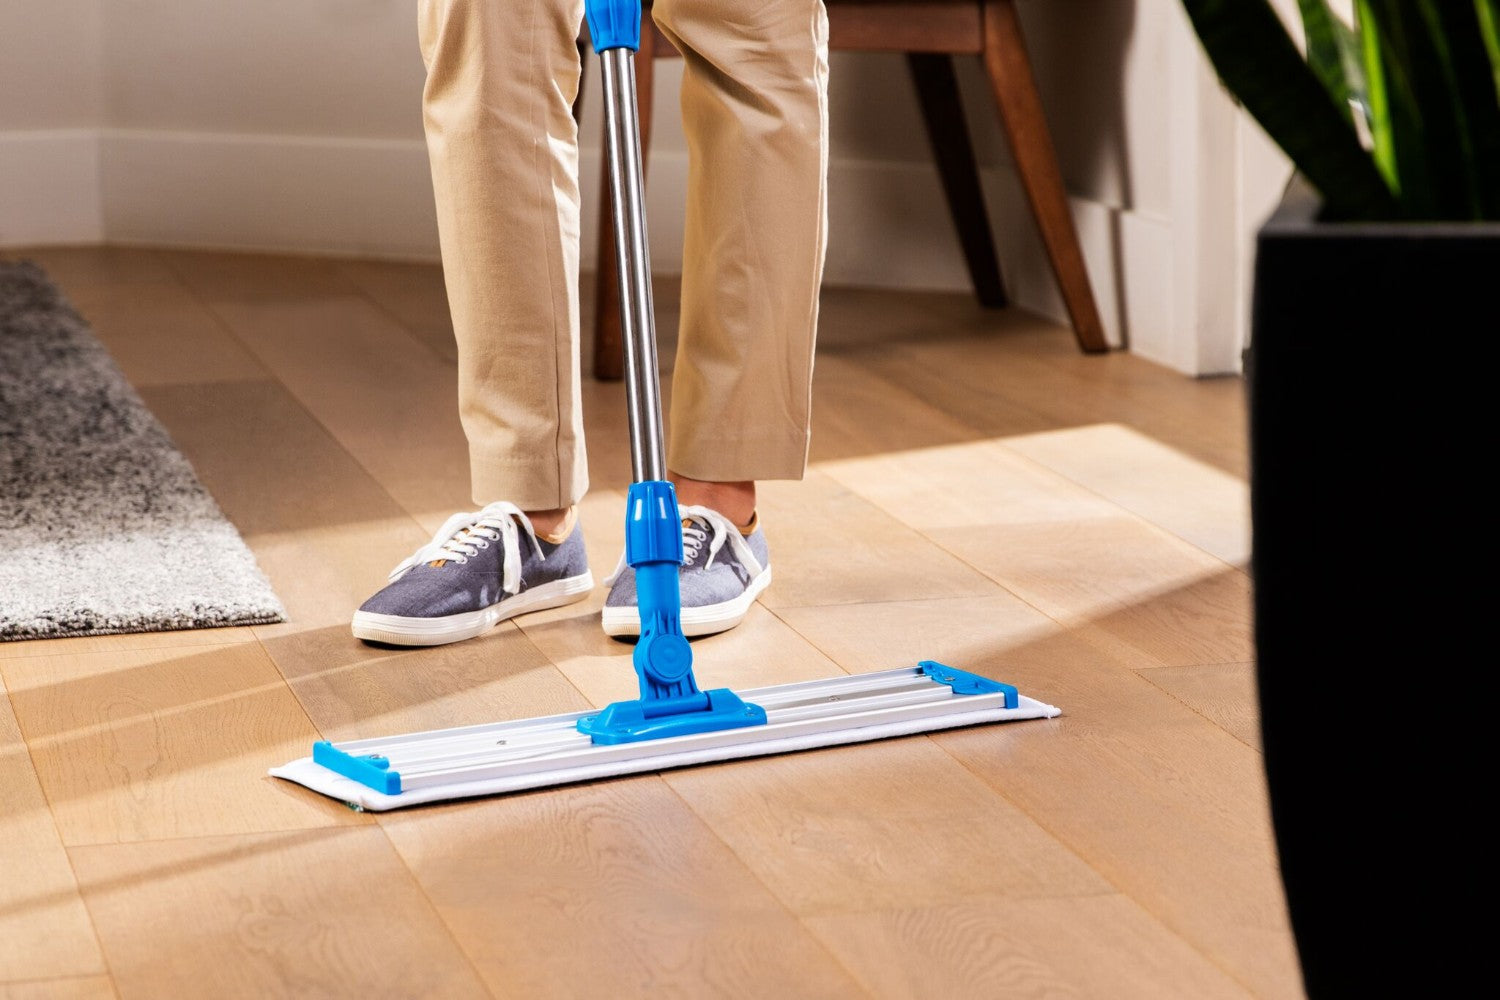 20 Inch Pad Shown-48 Inch Microfiber Dust Mop For Cleaning Hard Floor Surfaces MDM50